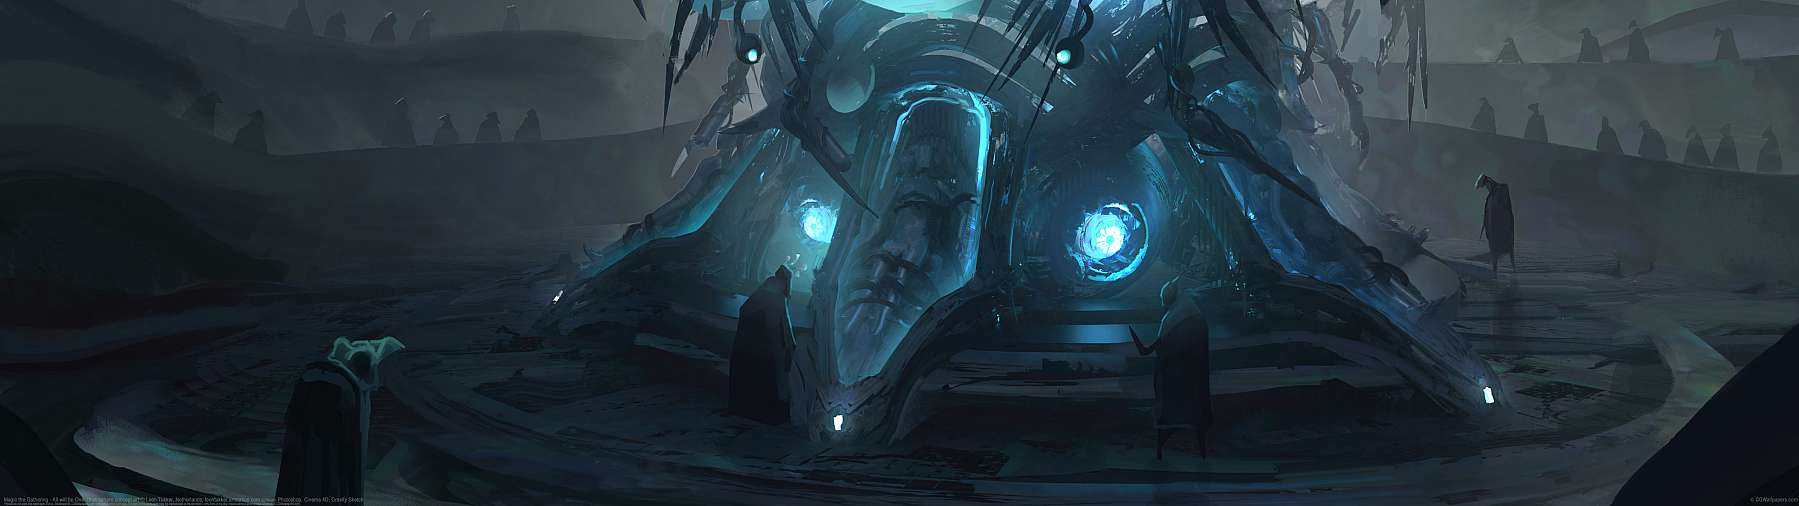 Magic the Gathering - All will be One: Blue sphere concept art ultralarge fond d'cran